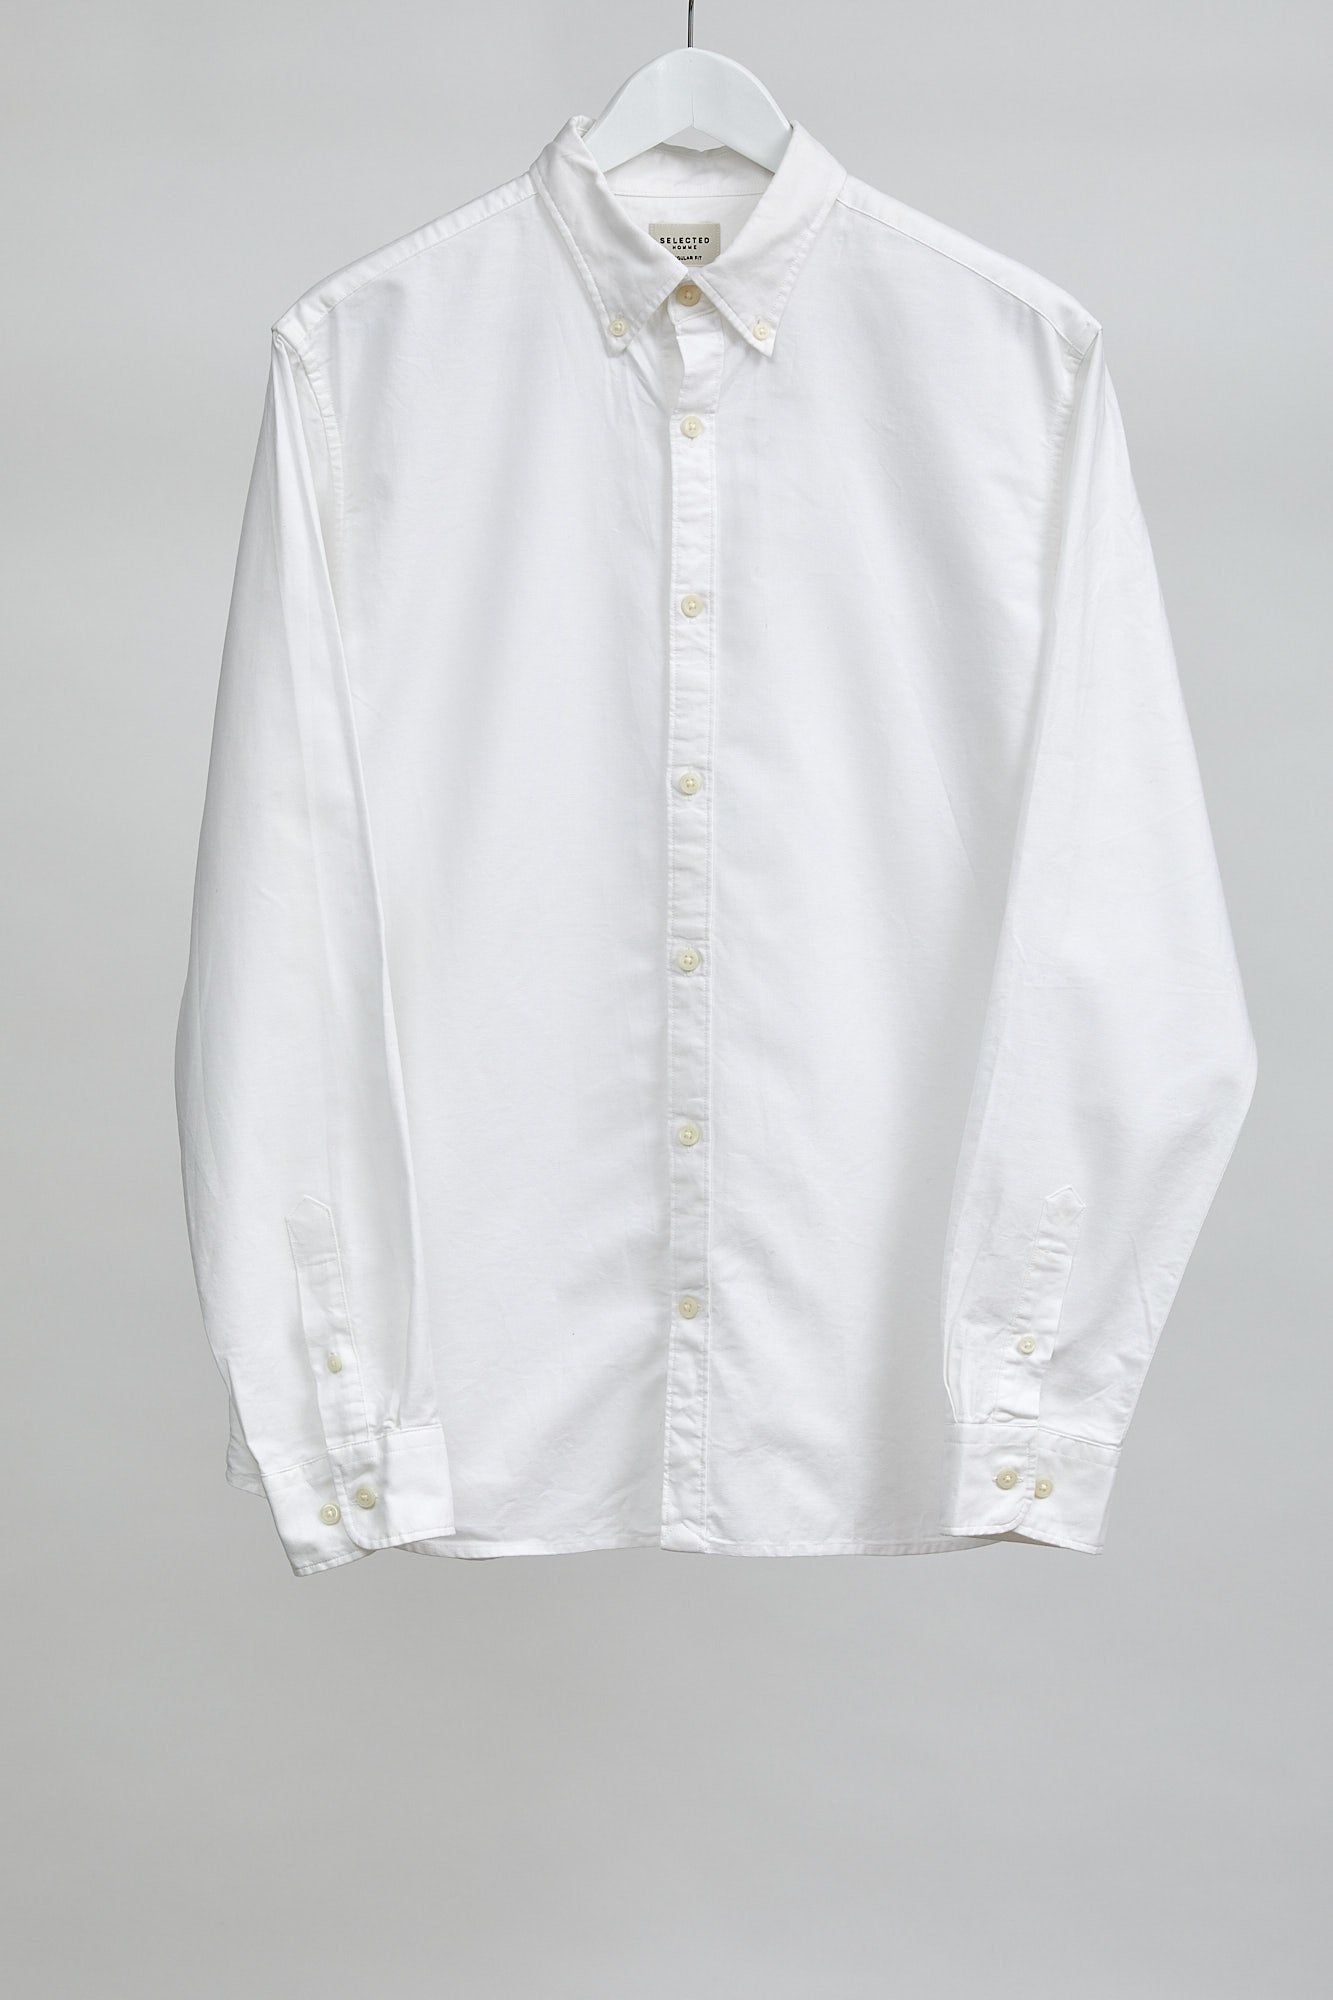 Mens Selected Homme White Oxford Shirt: Size Medium